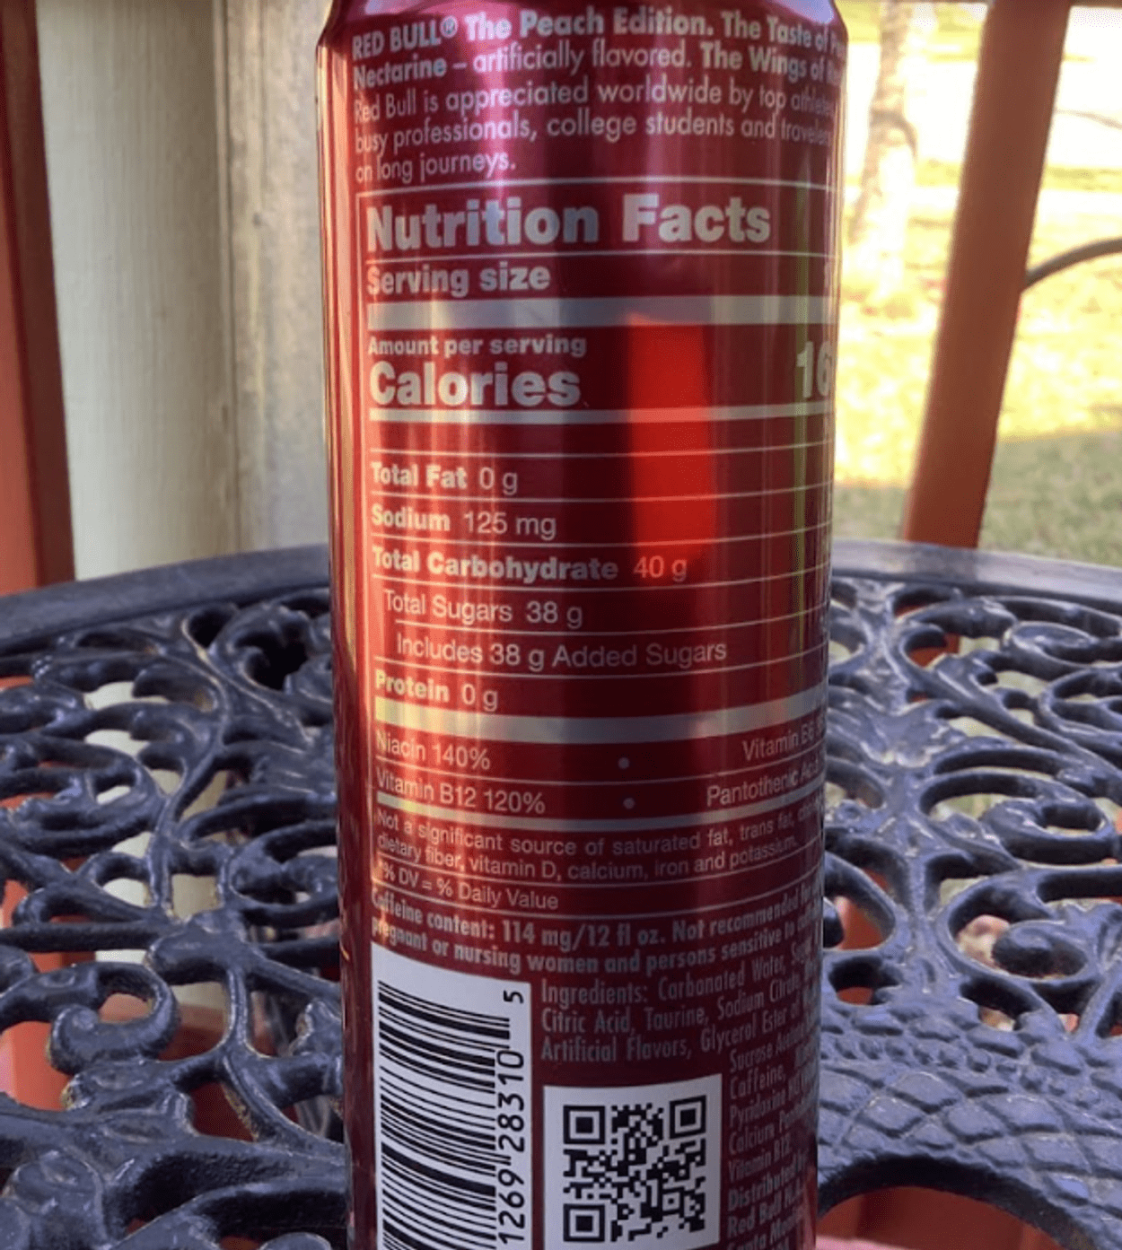 Nutrition facts of Red Bull Peach Edition.